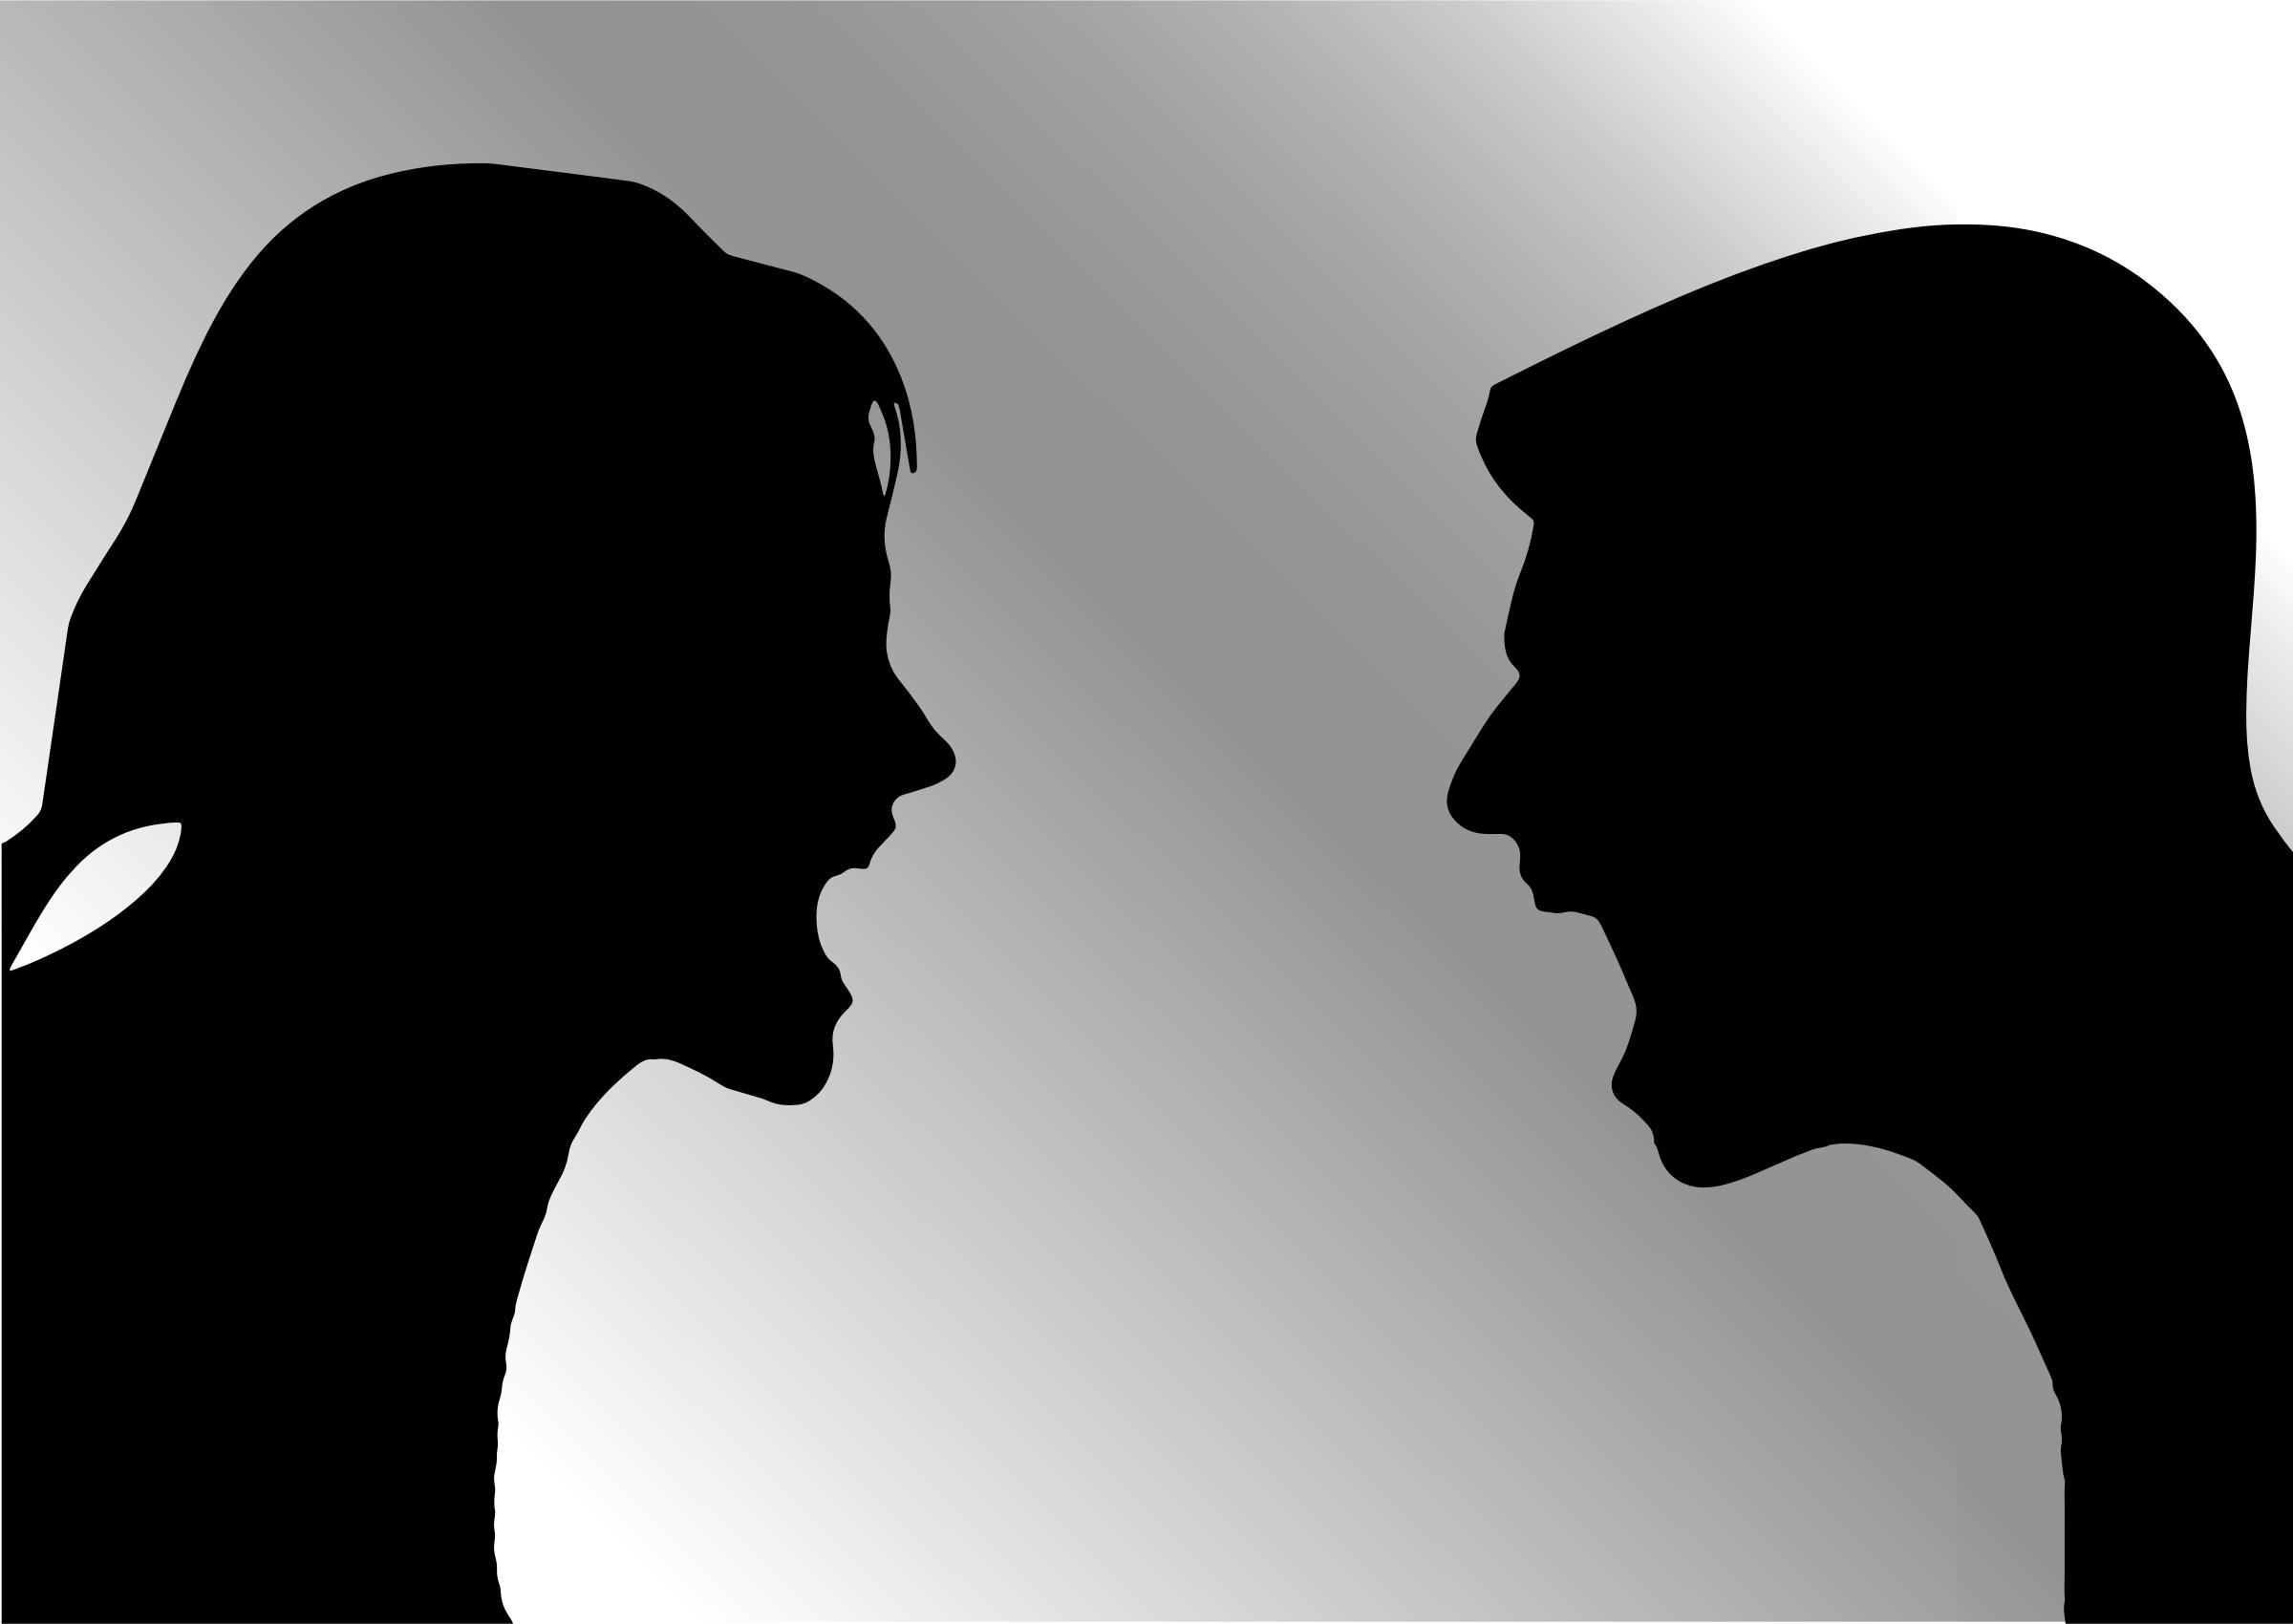 Man Woman Arguing Silhouette png